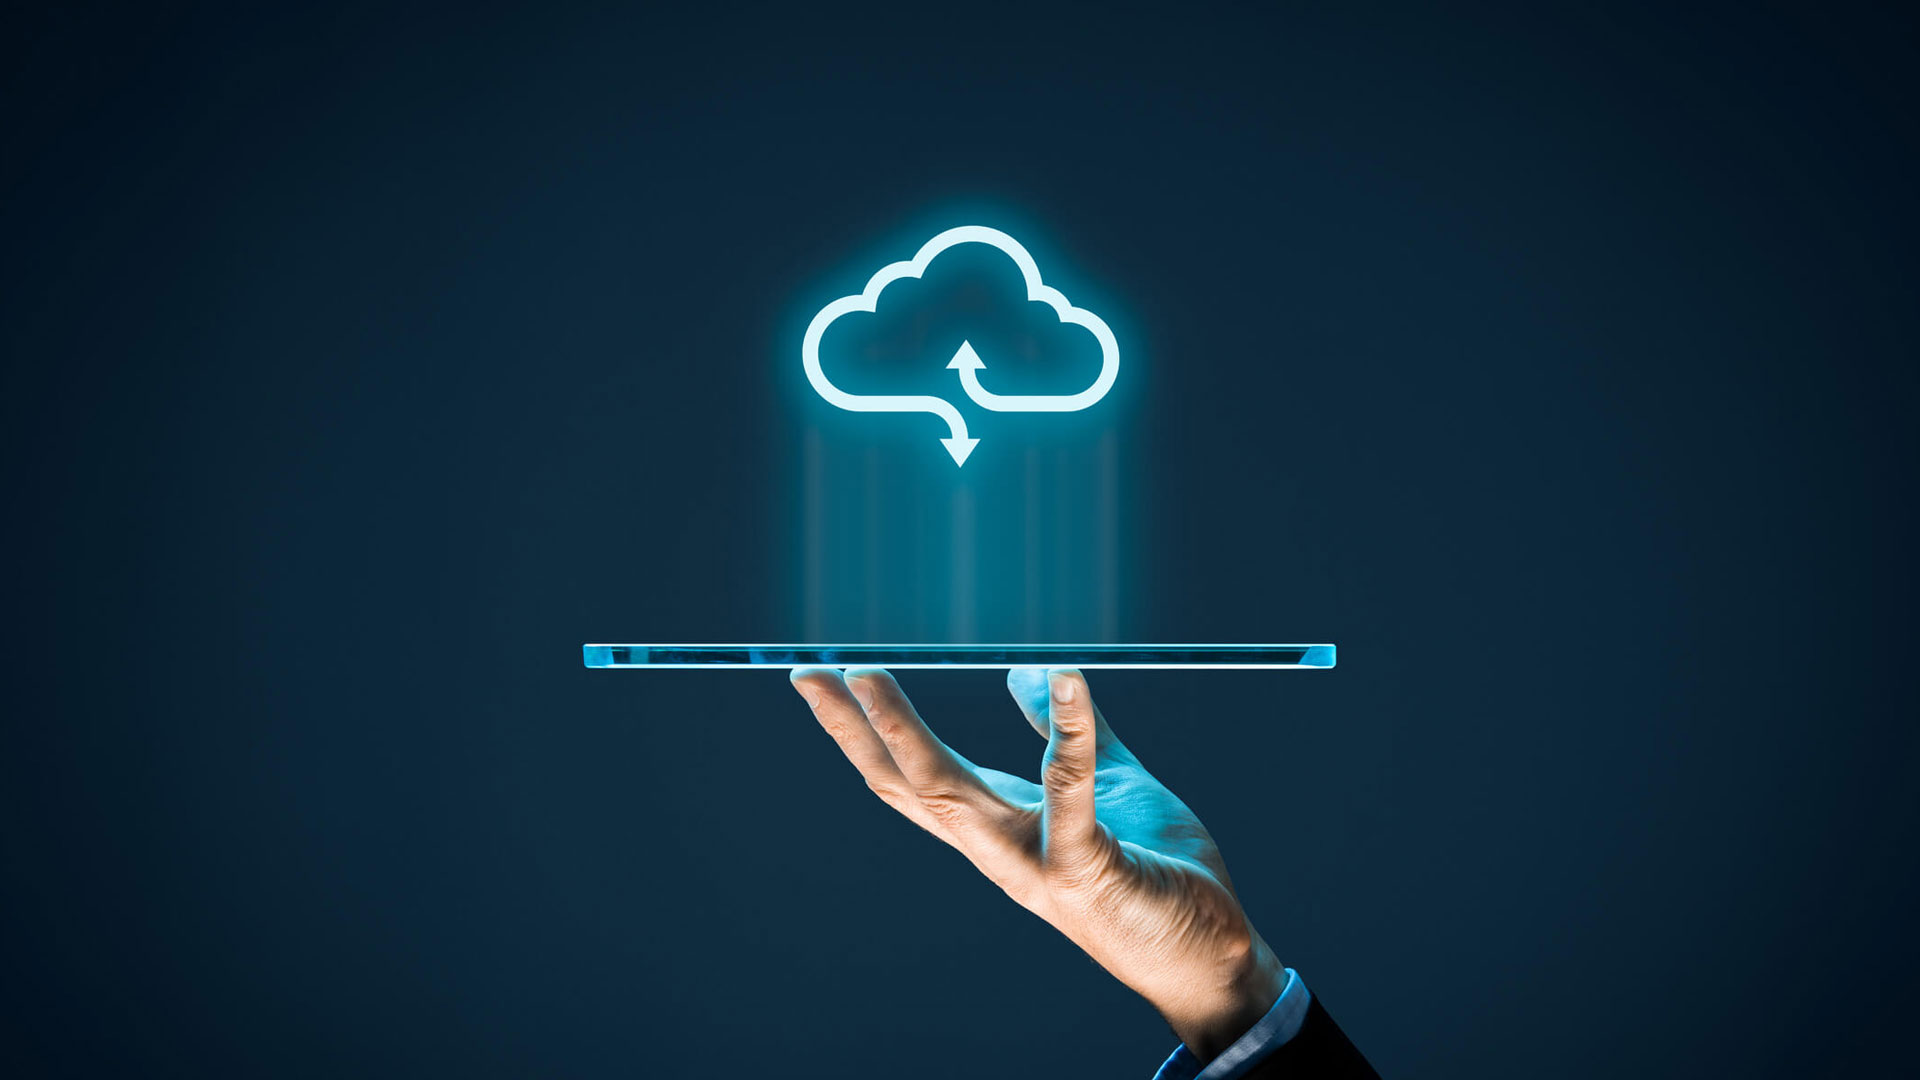 6-Reasons-Why-You-Should-Move-Your-Business-to-the-Cloud